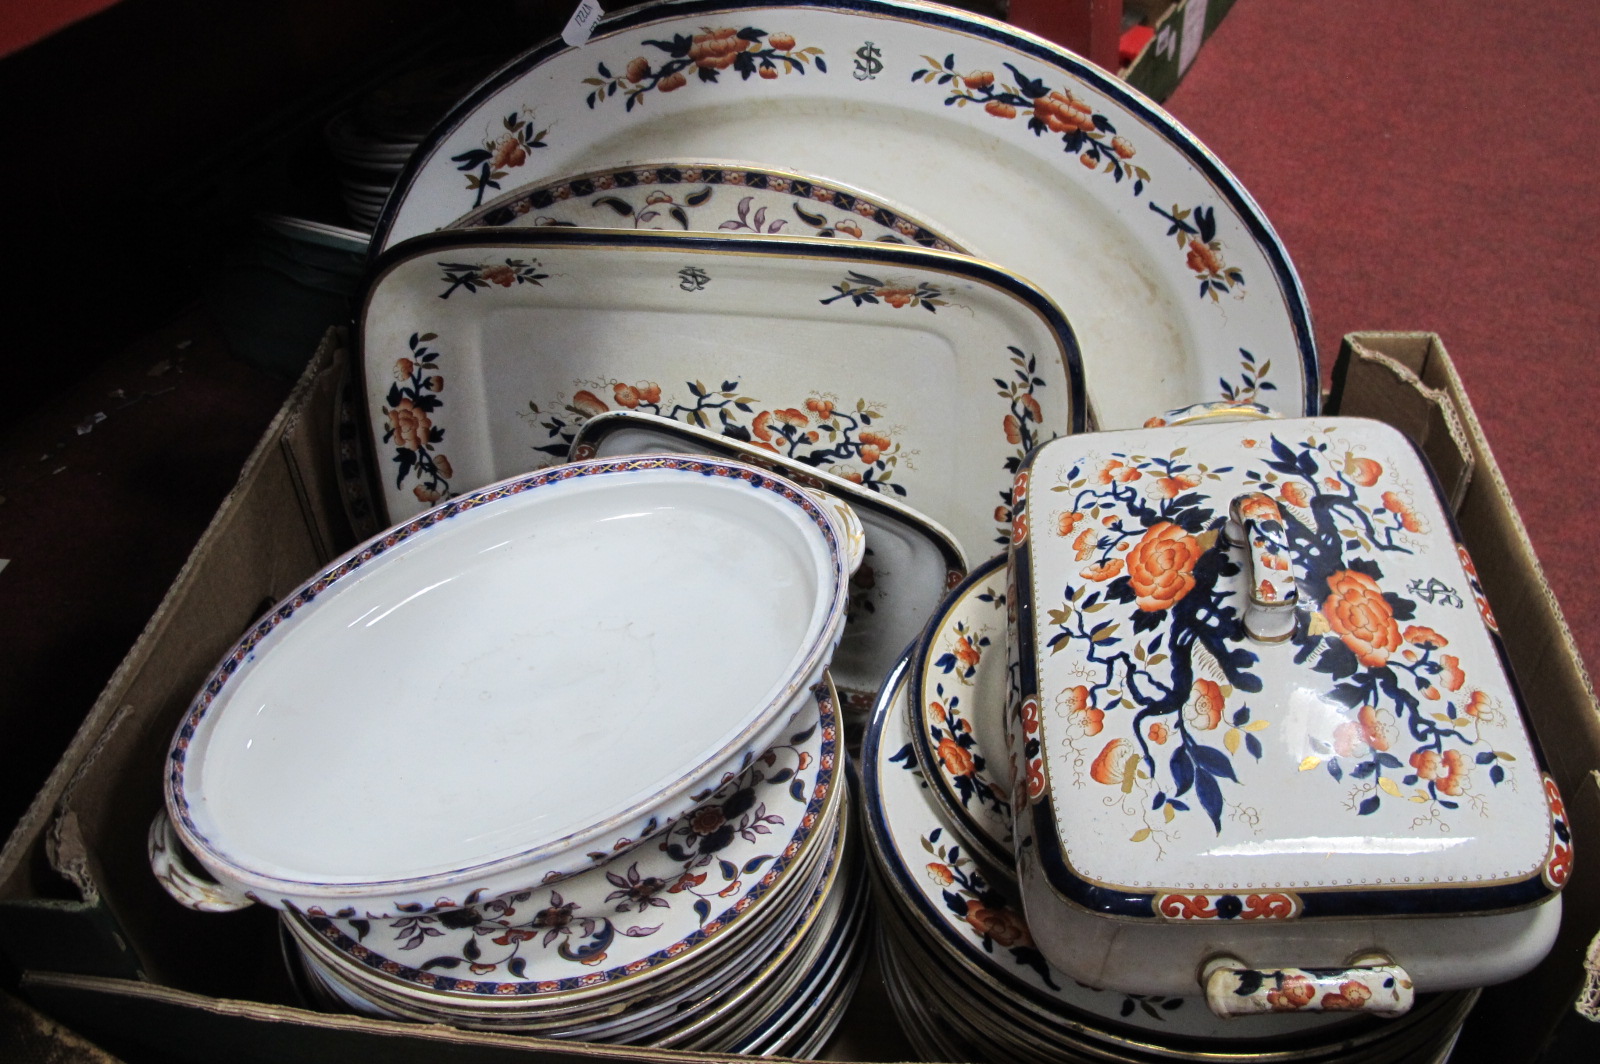 A XIX Century Wedgwood Co 'Indiana' Part Dinner Service, together with one other part dinner